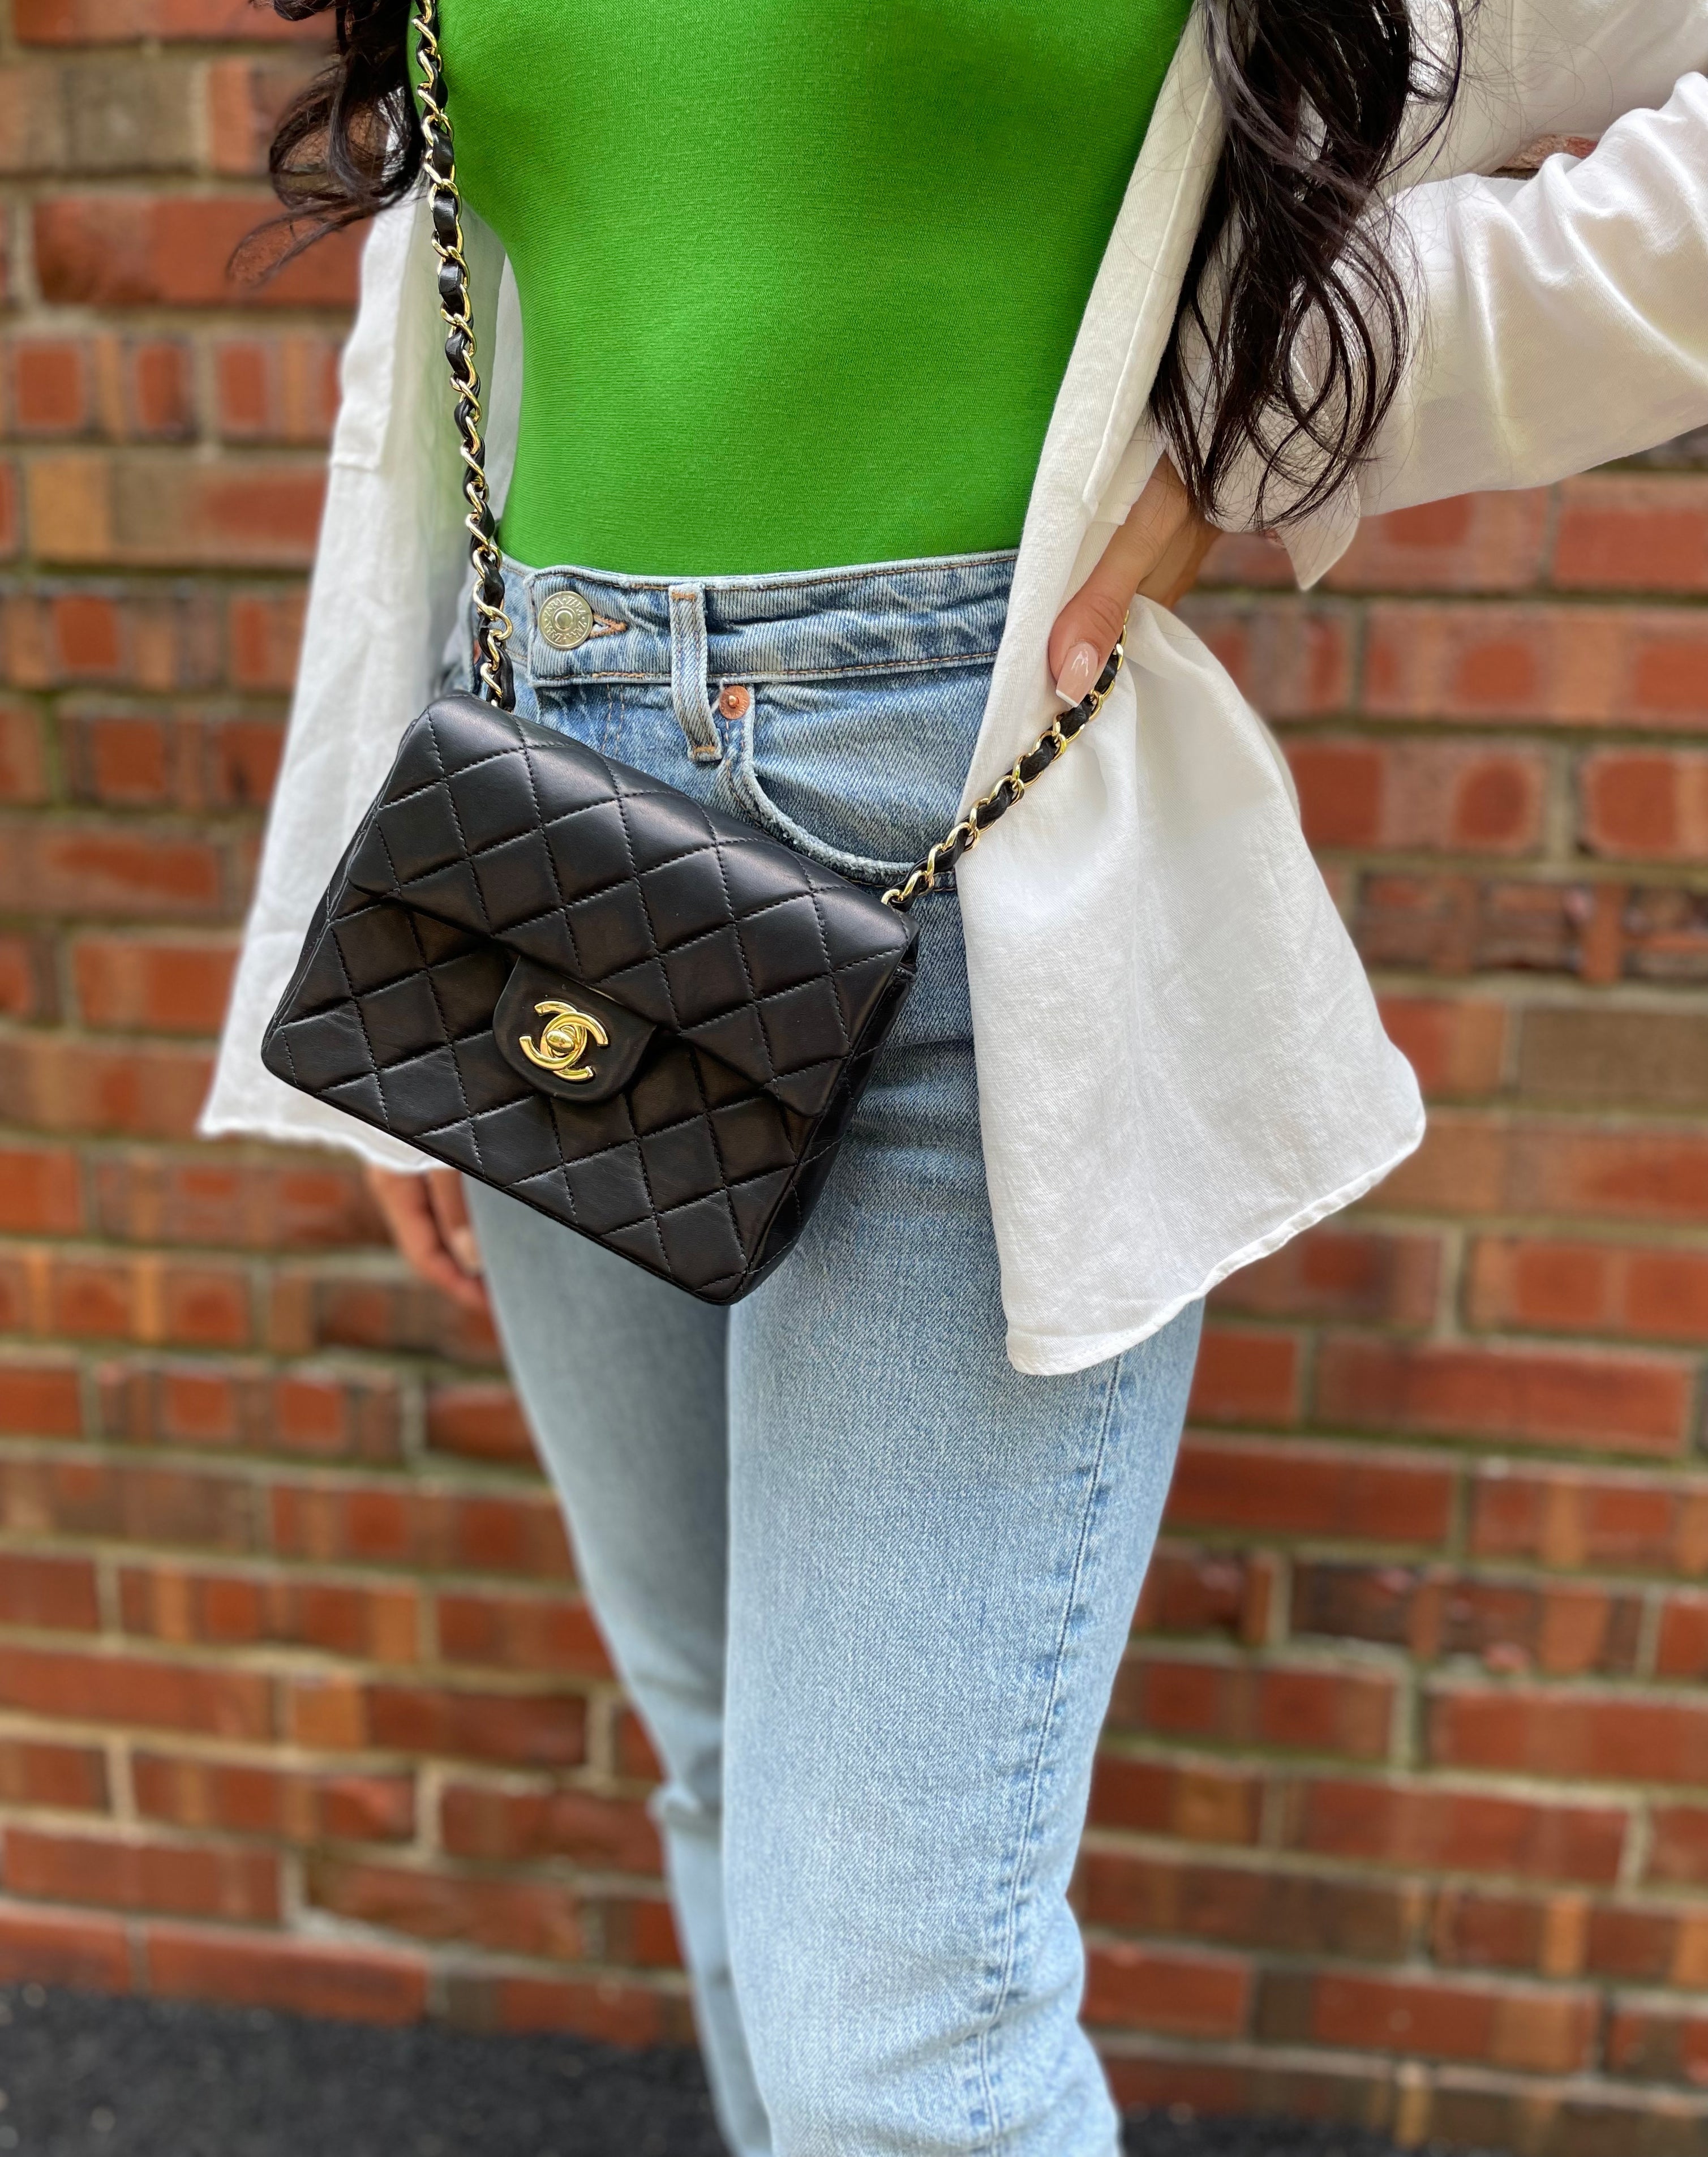 The Chanel Price Increase and Why You Should Invest in a Chanel Bag